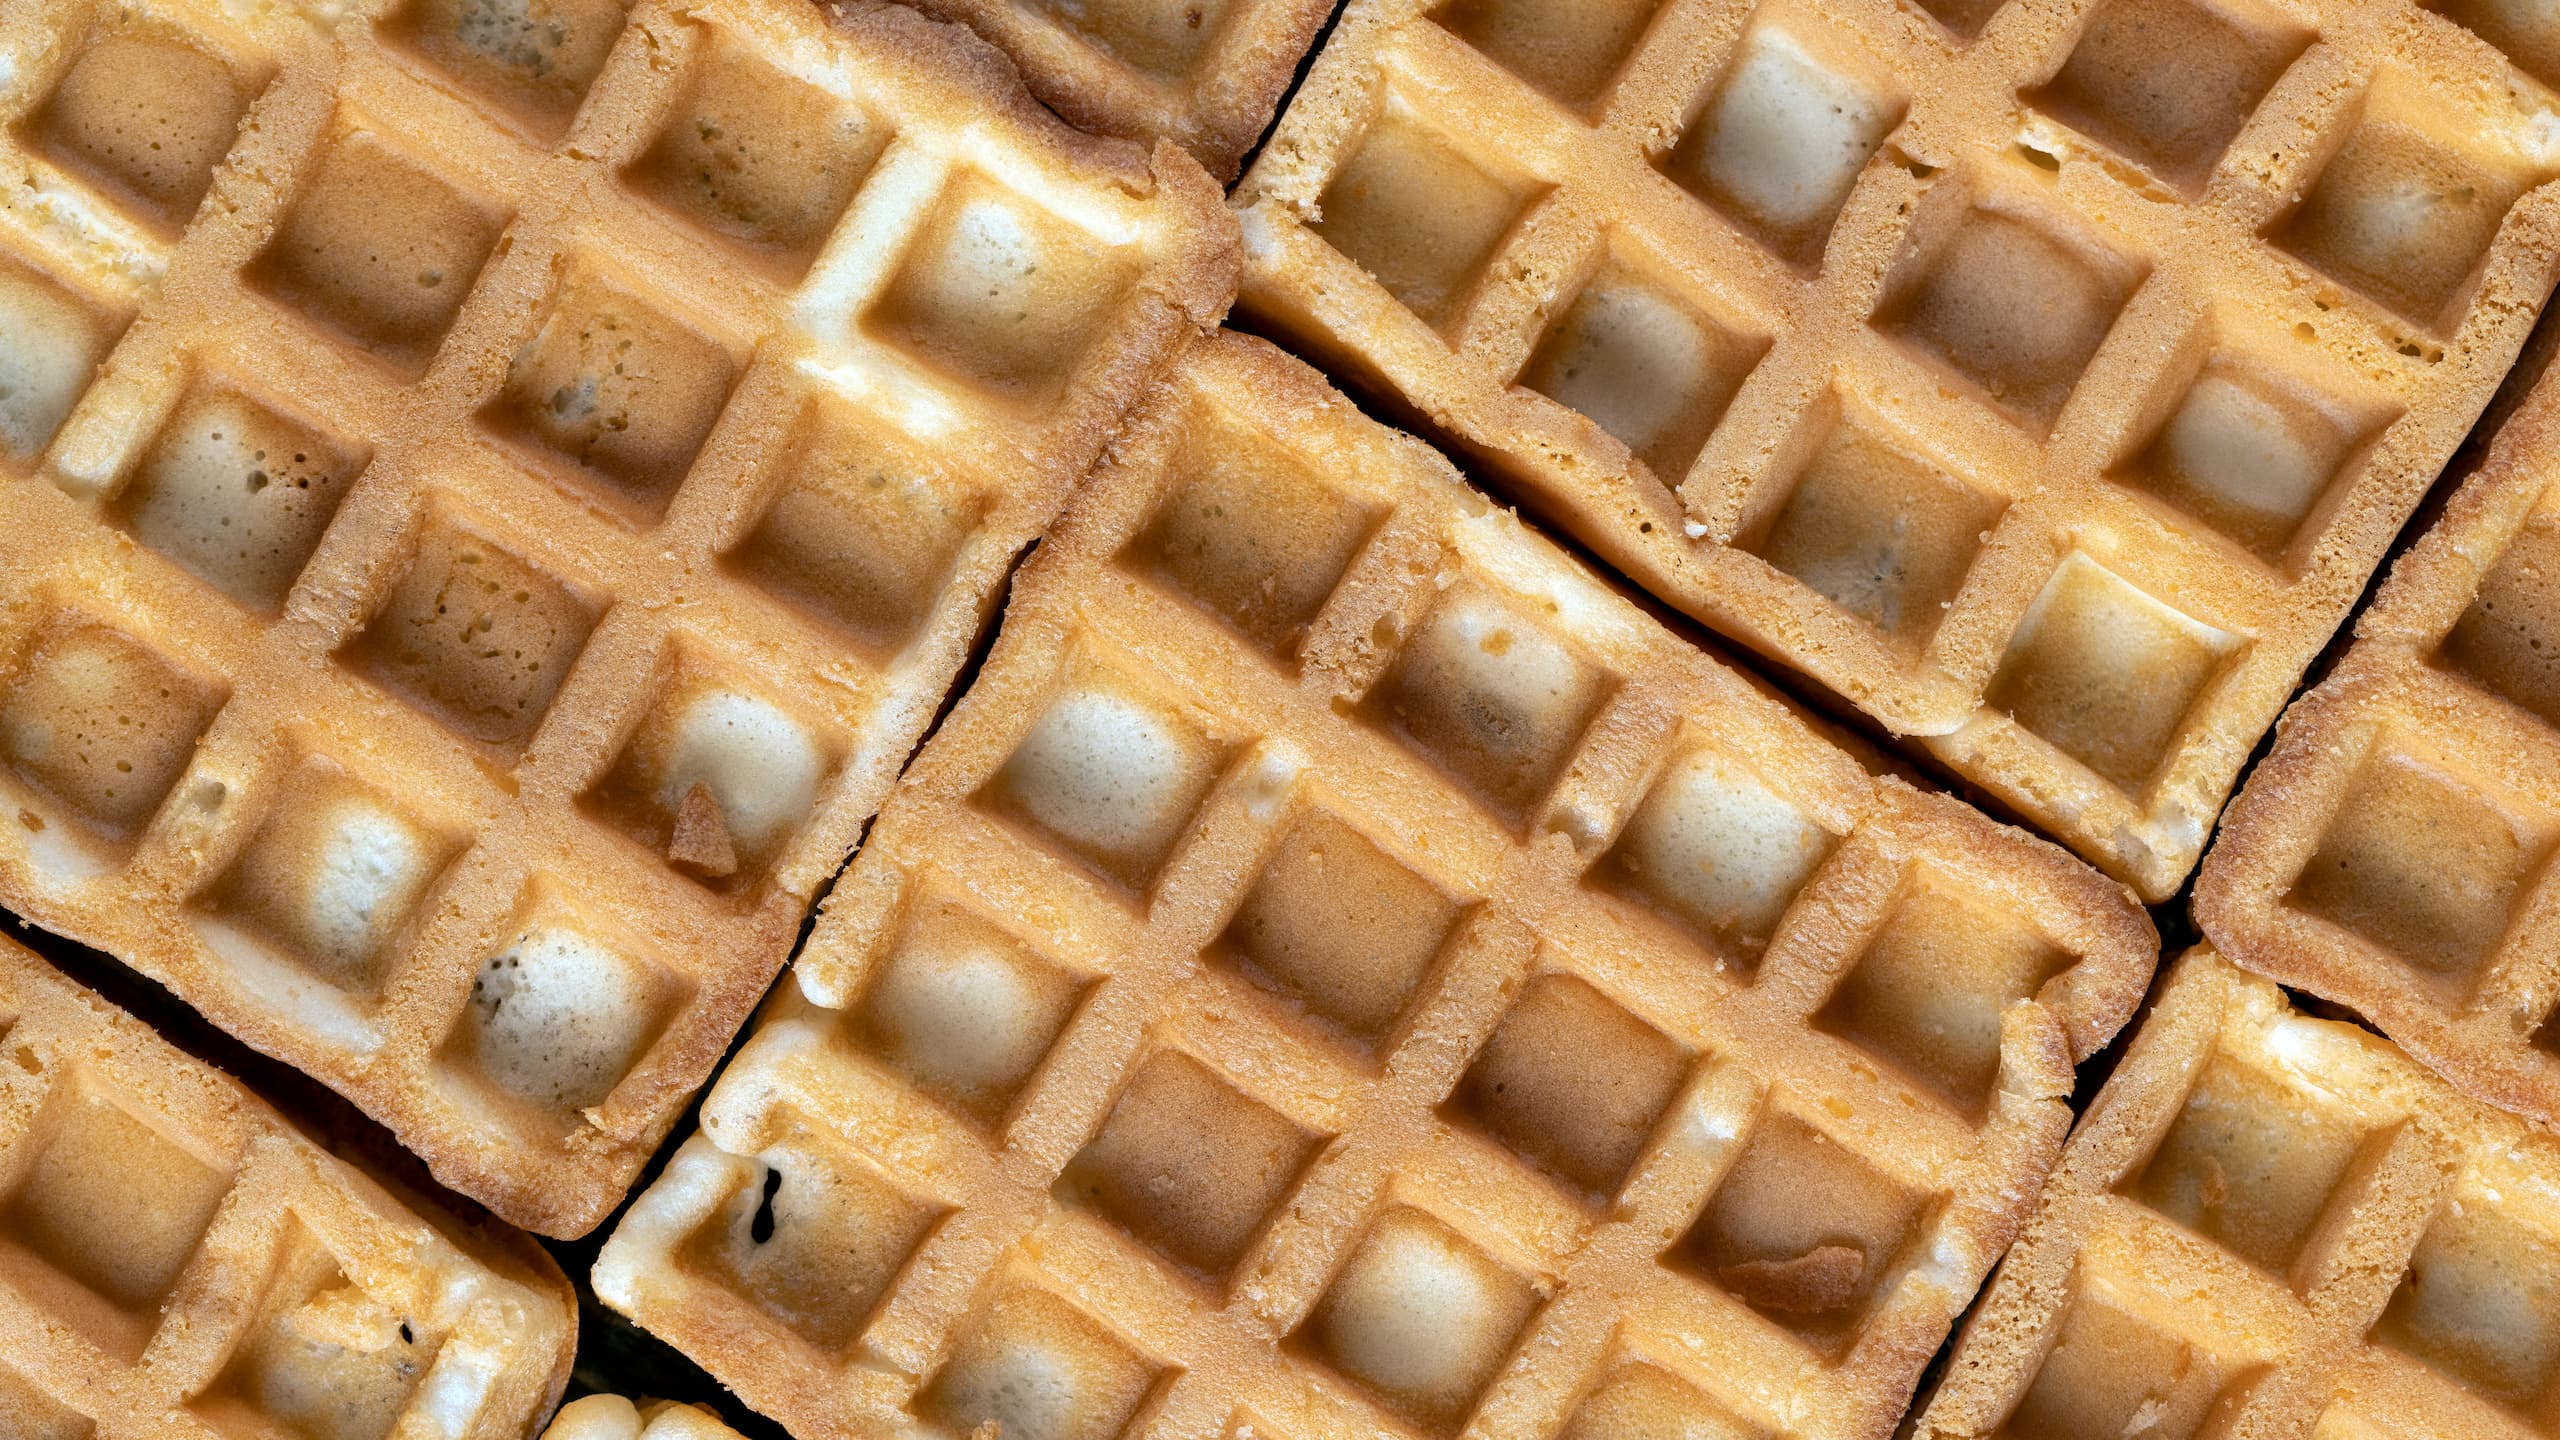 Soft and sweet Herbalife waffles